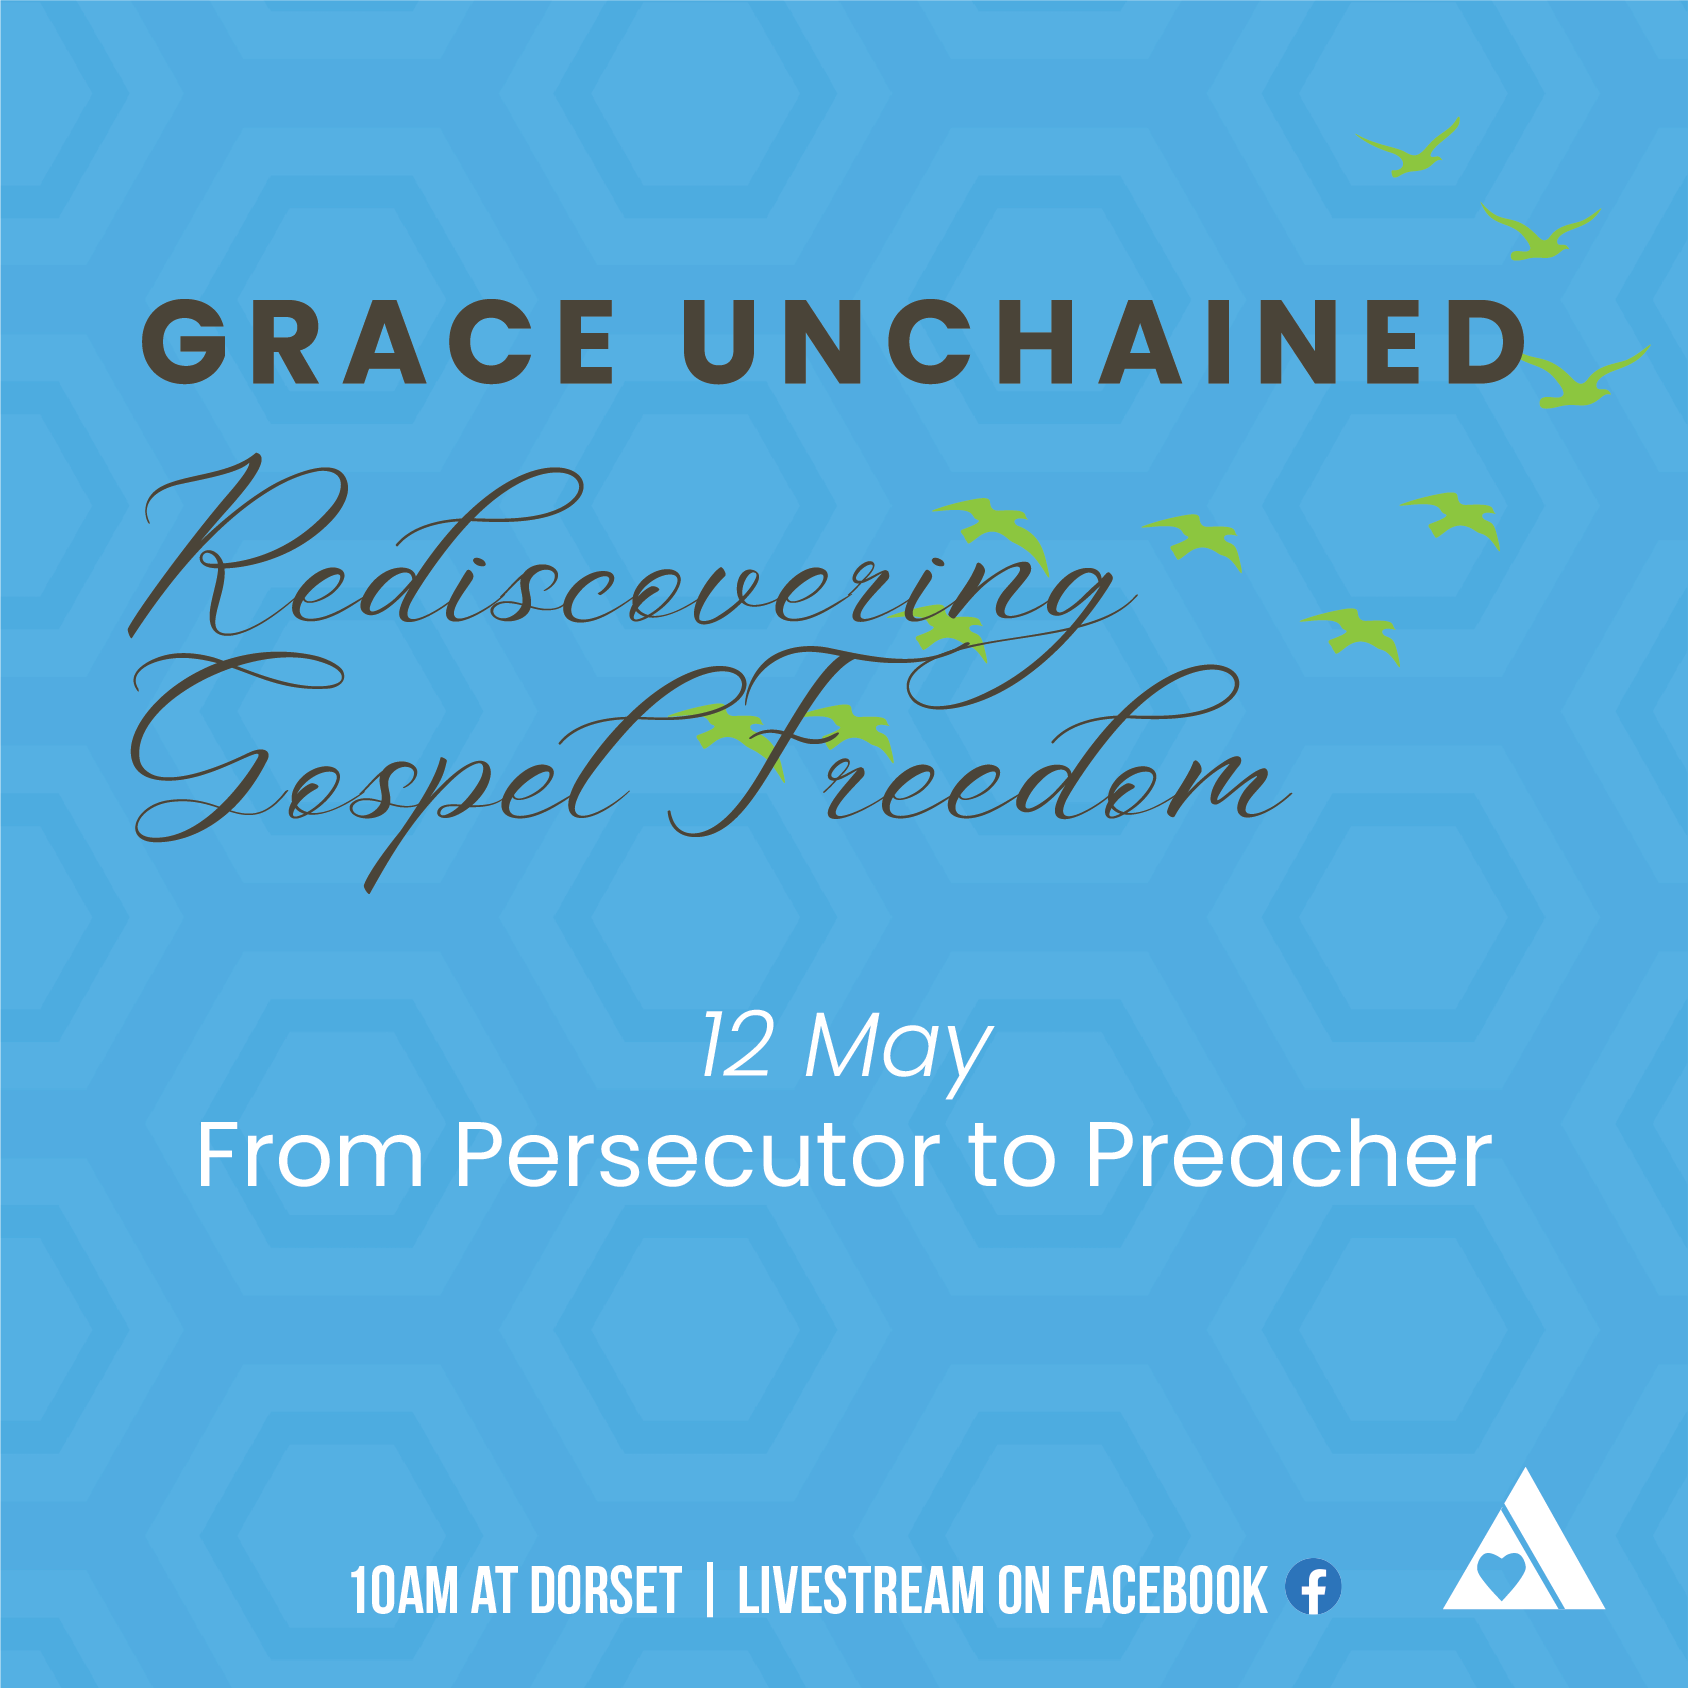 From Persecutor to Preacher